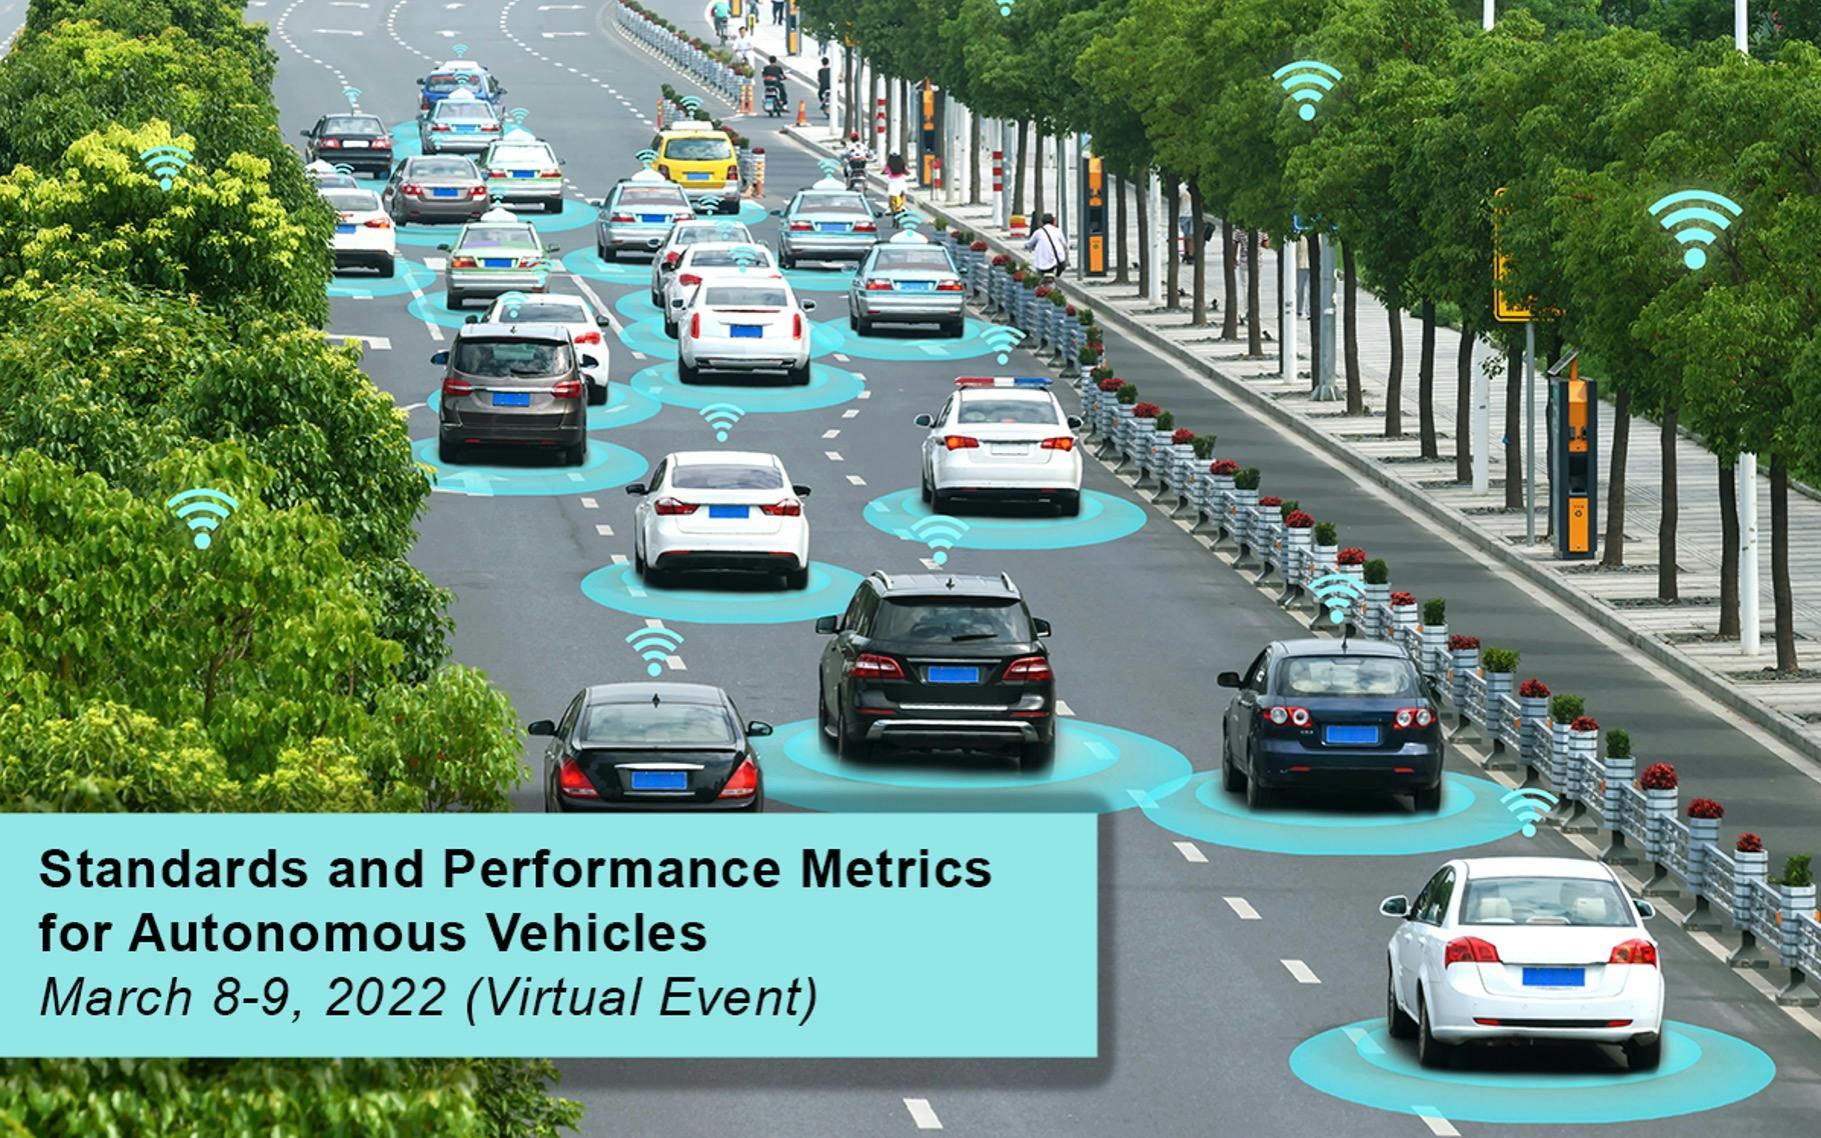 Illustrated photo of connected cars, text: Standards and Performance Metrics for Autonomous Vehicles